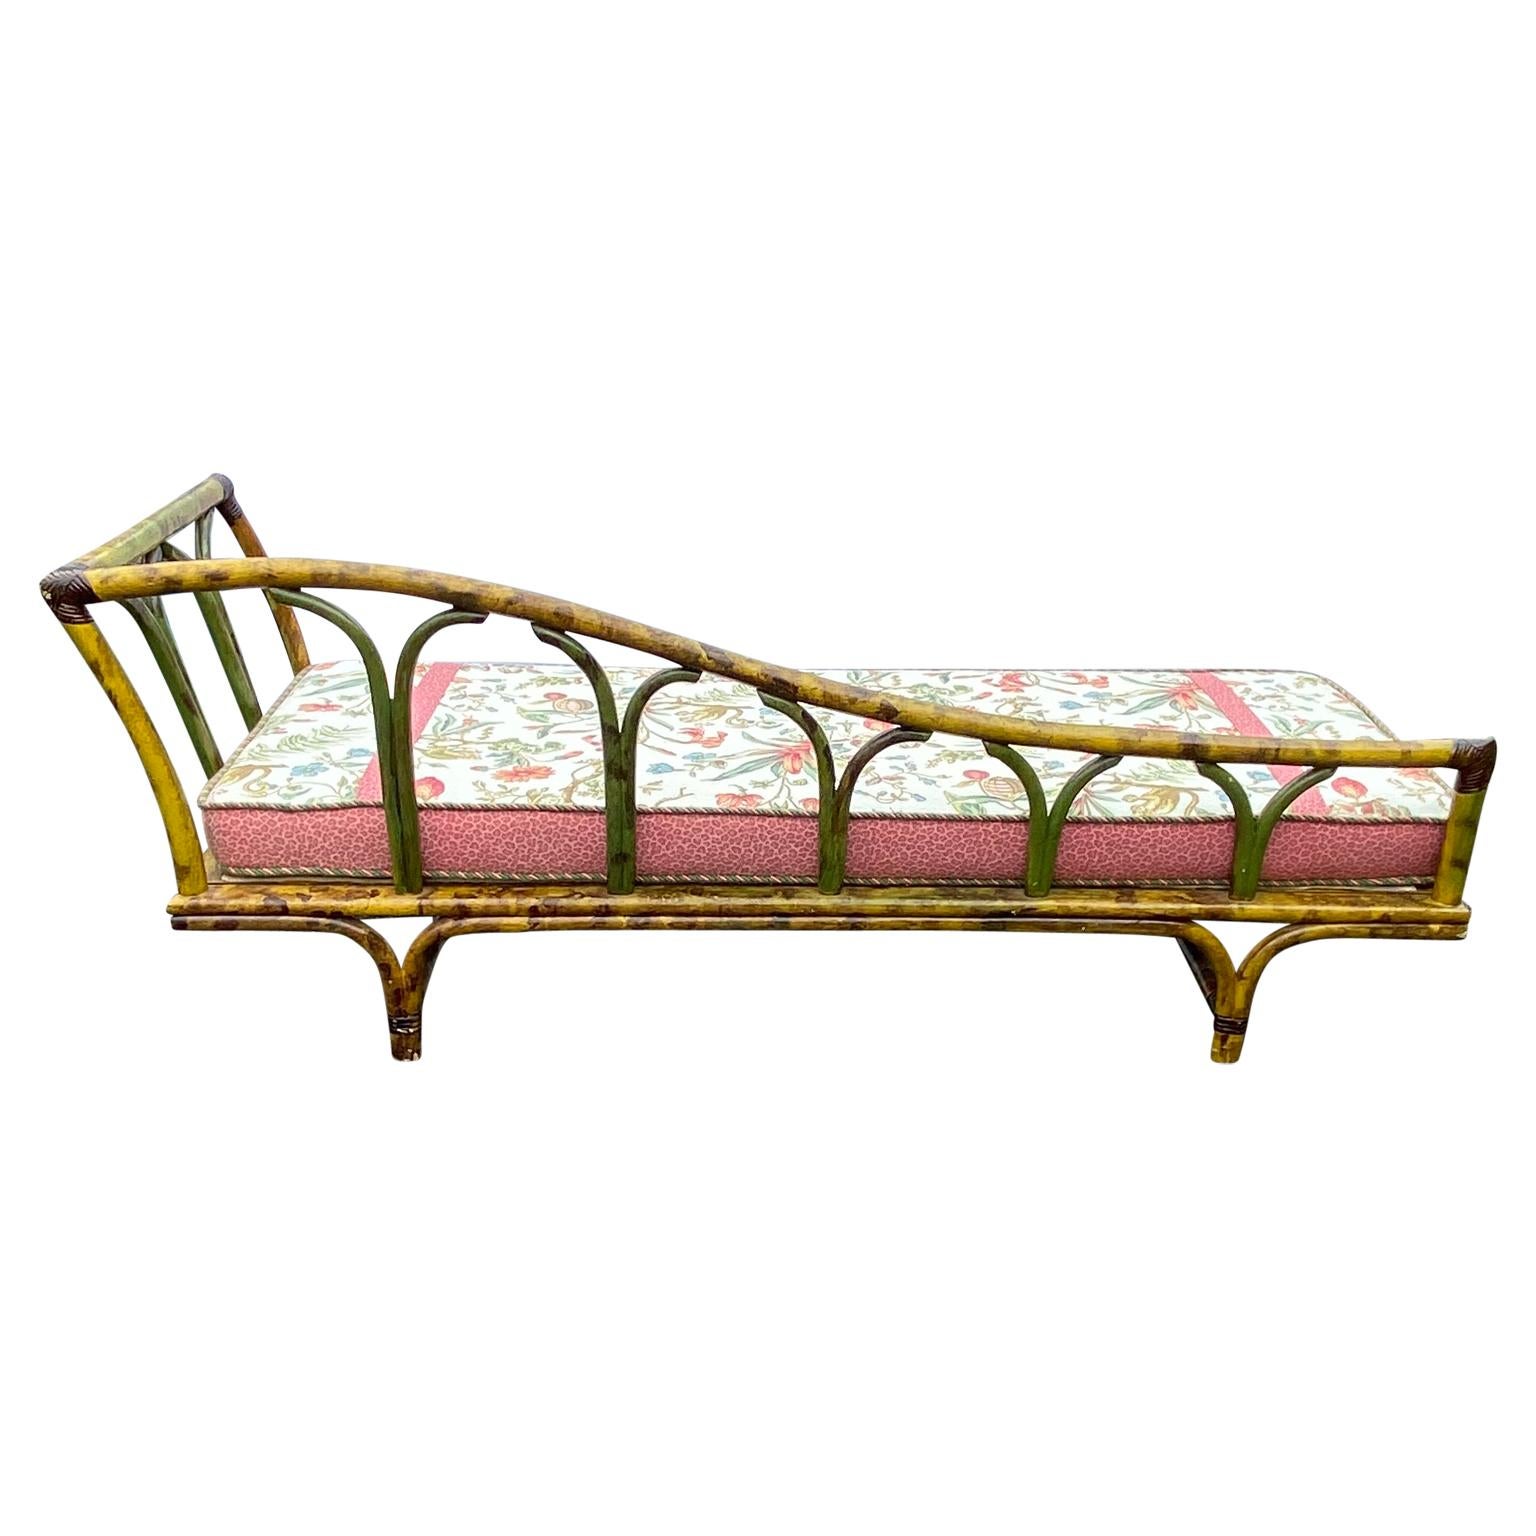 Mid-20th Century Ficks Reed Rattan Daybed Chaise Lounge, Mid-Century Modern